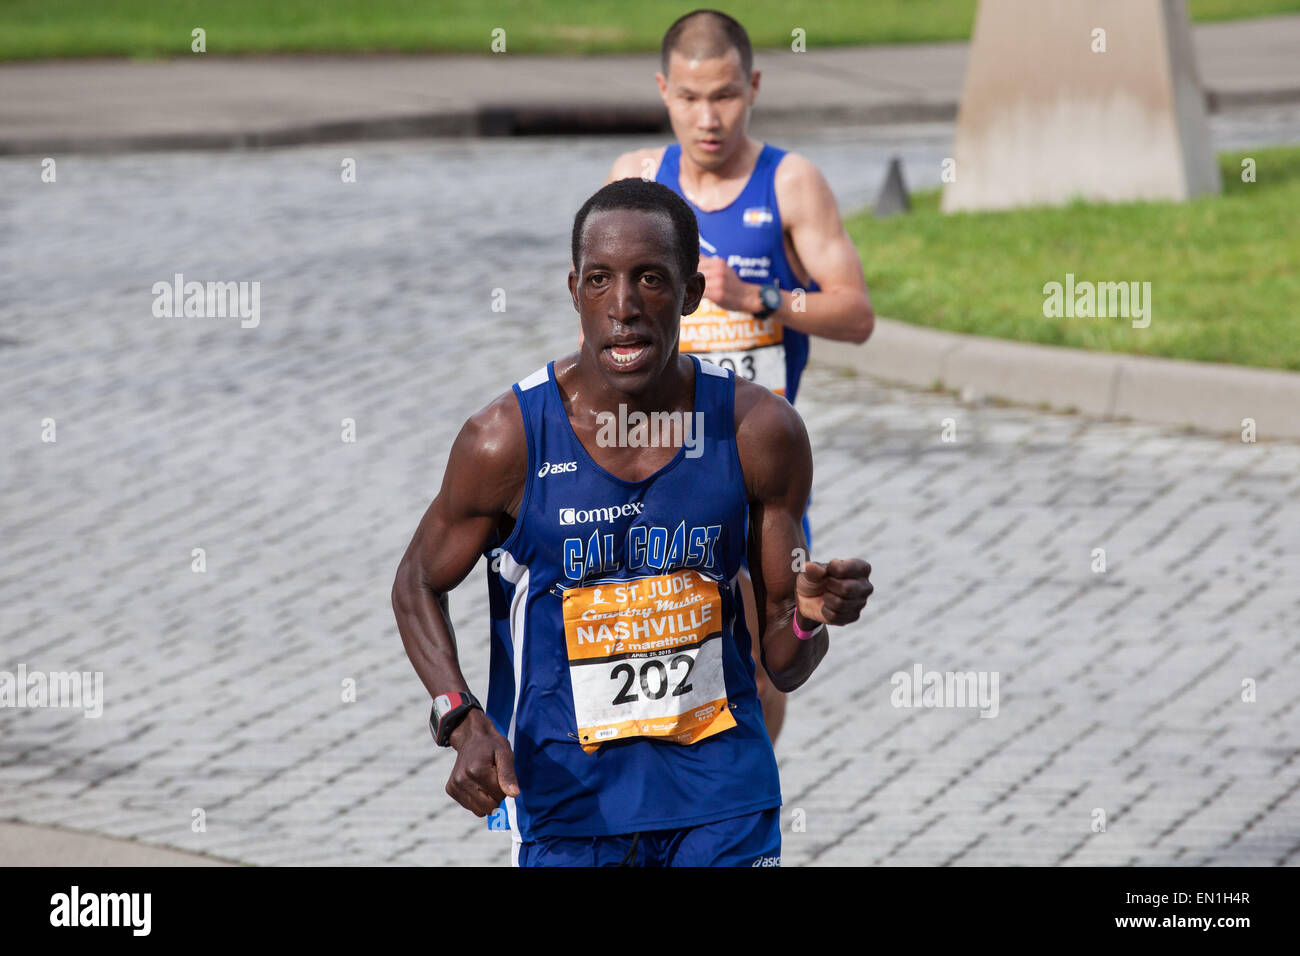 Nashville, Tennessee, USA. 25th Apr, 2015. ROOSEVELT COOK (front, bib number 202) overtakes STEVE CHU (right, bib number 203) during the final stretch of the St. Jude Country Music Half Marathon in Nashville. © Raffe Lazarian/ZUMA Wire/ZUMAPRESS.com/Alamy Live News Stock Photo